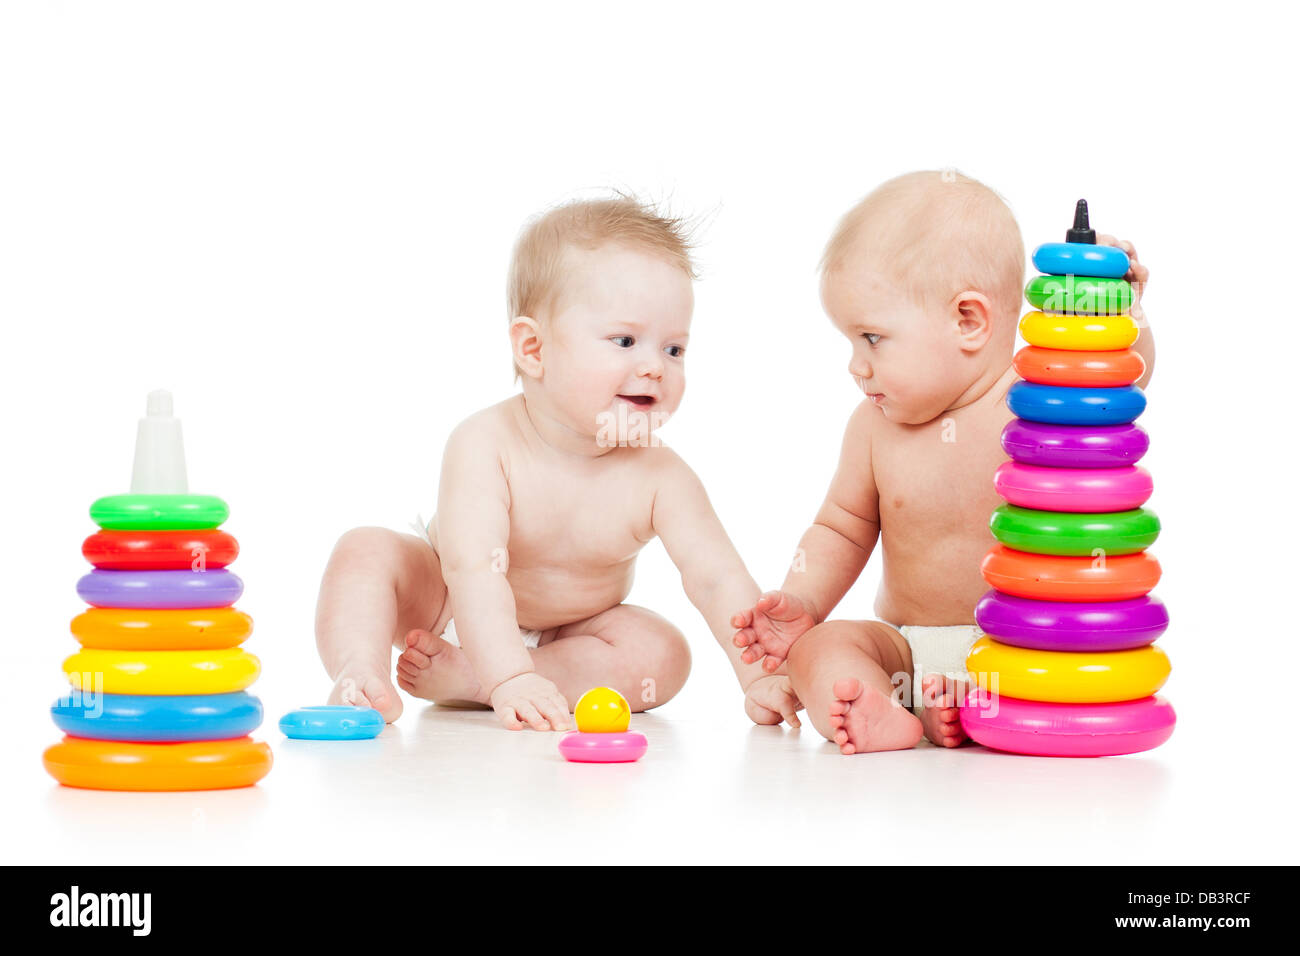 babies play with color developmental toys Stock Photo